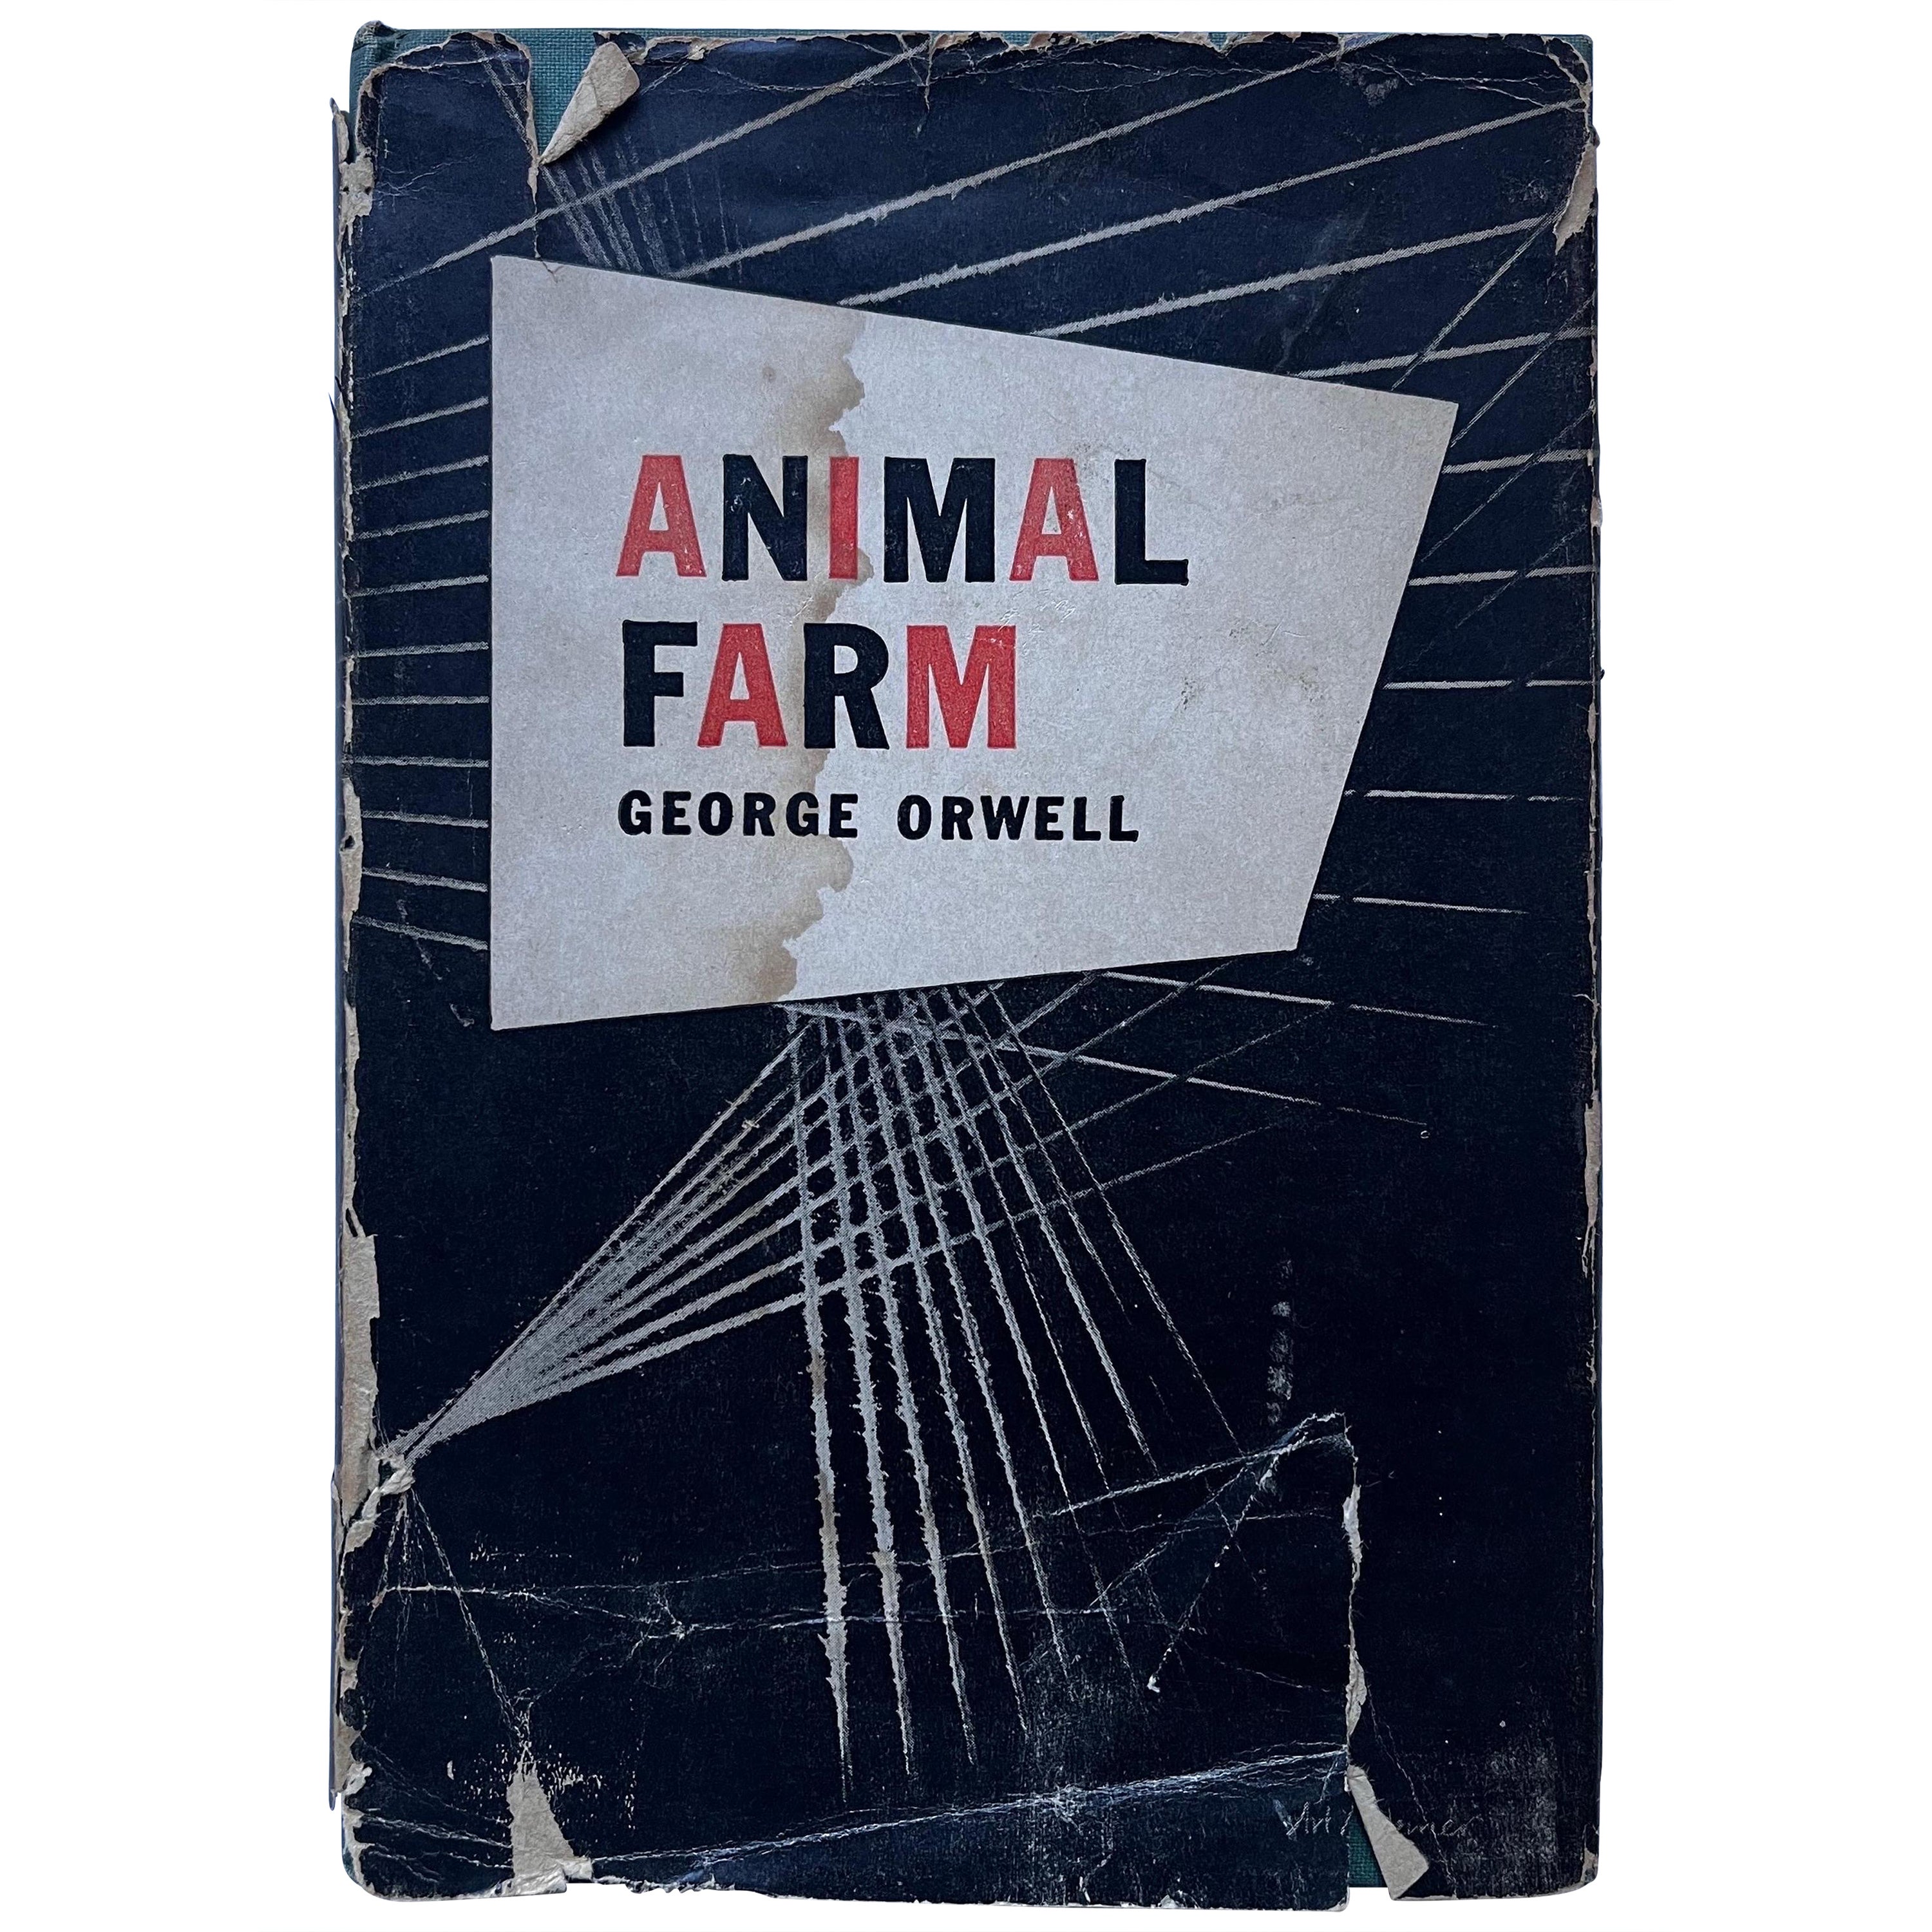 Animal Farm, George Orwell, first us edition, 1946, hardcover For Sale